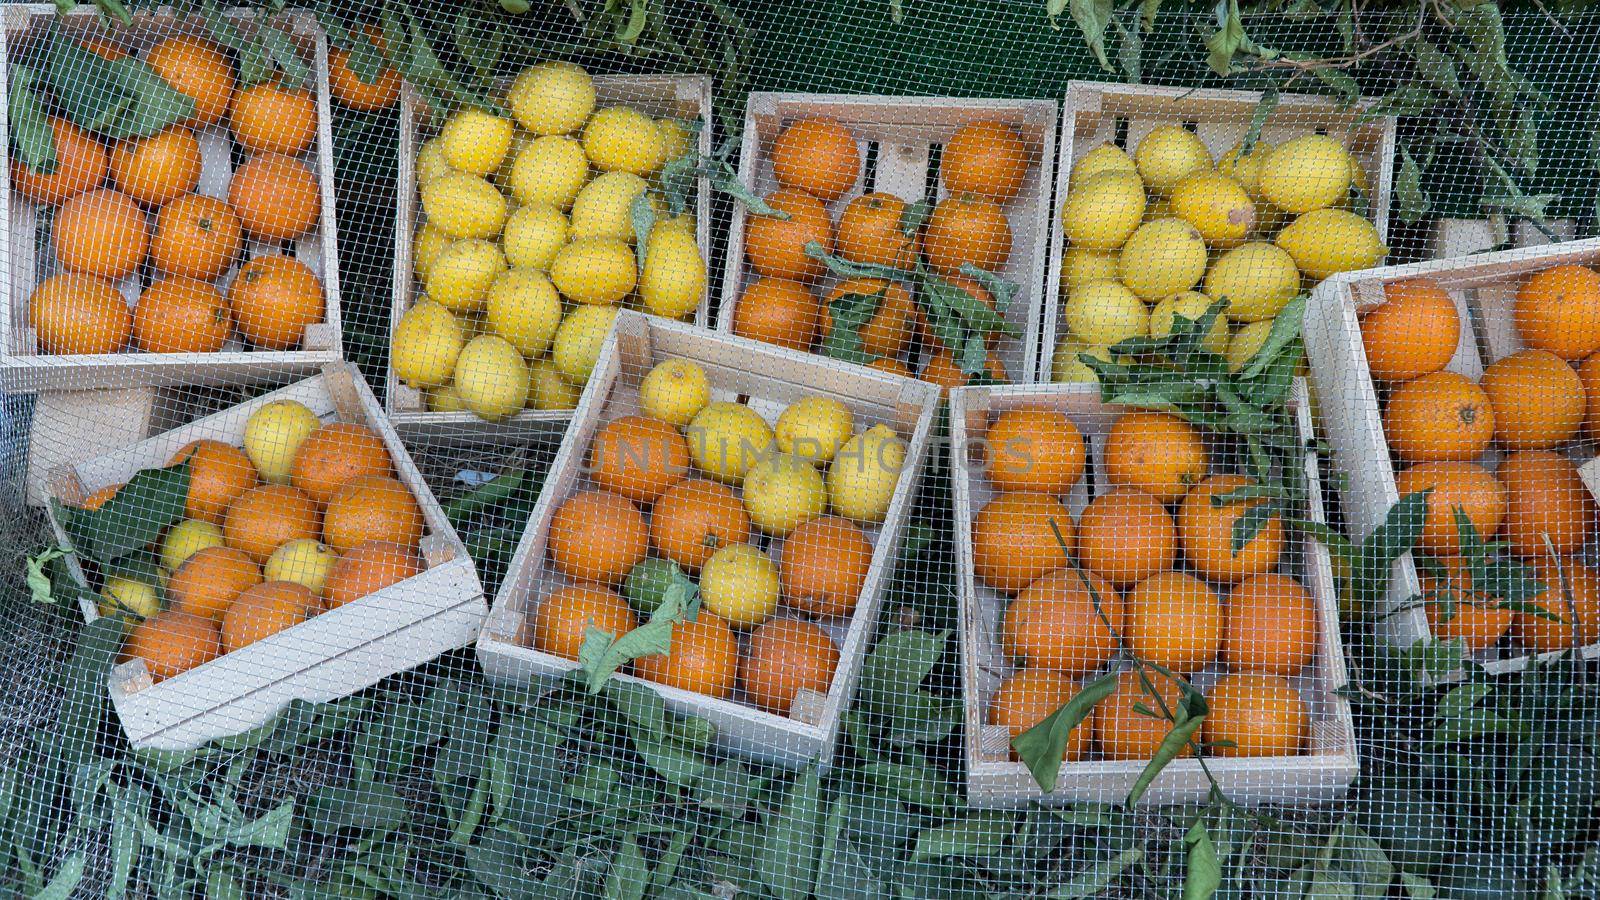 Oranges and lemons in wooden boxes under the net, citrus harvest by voktybre